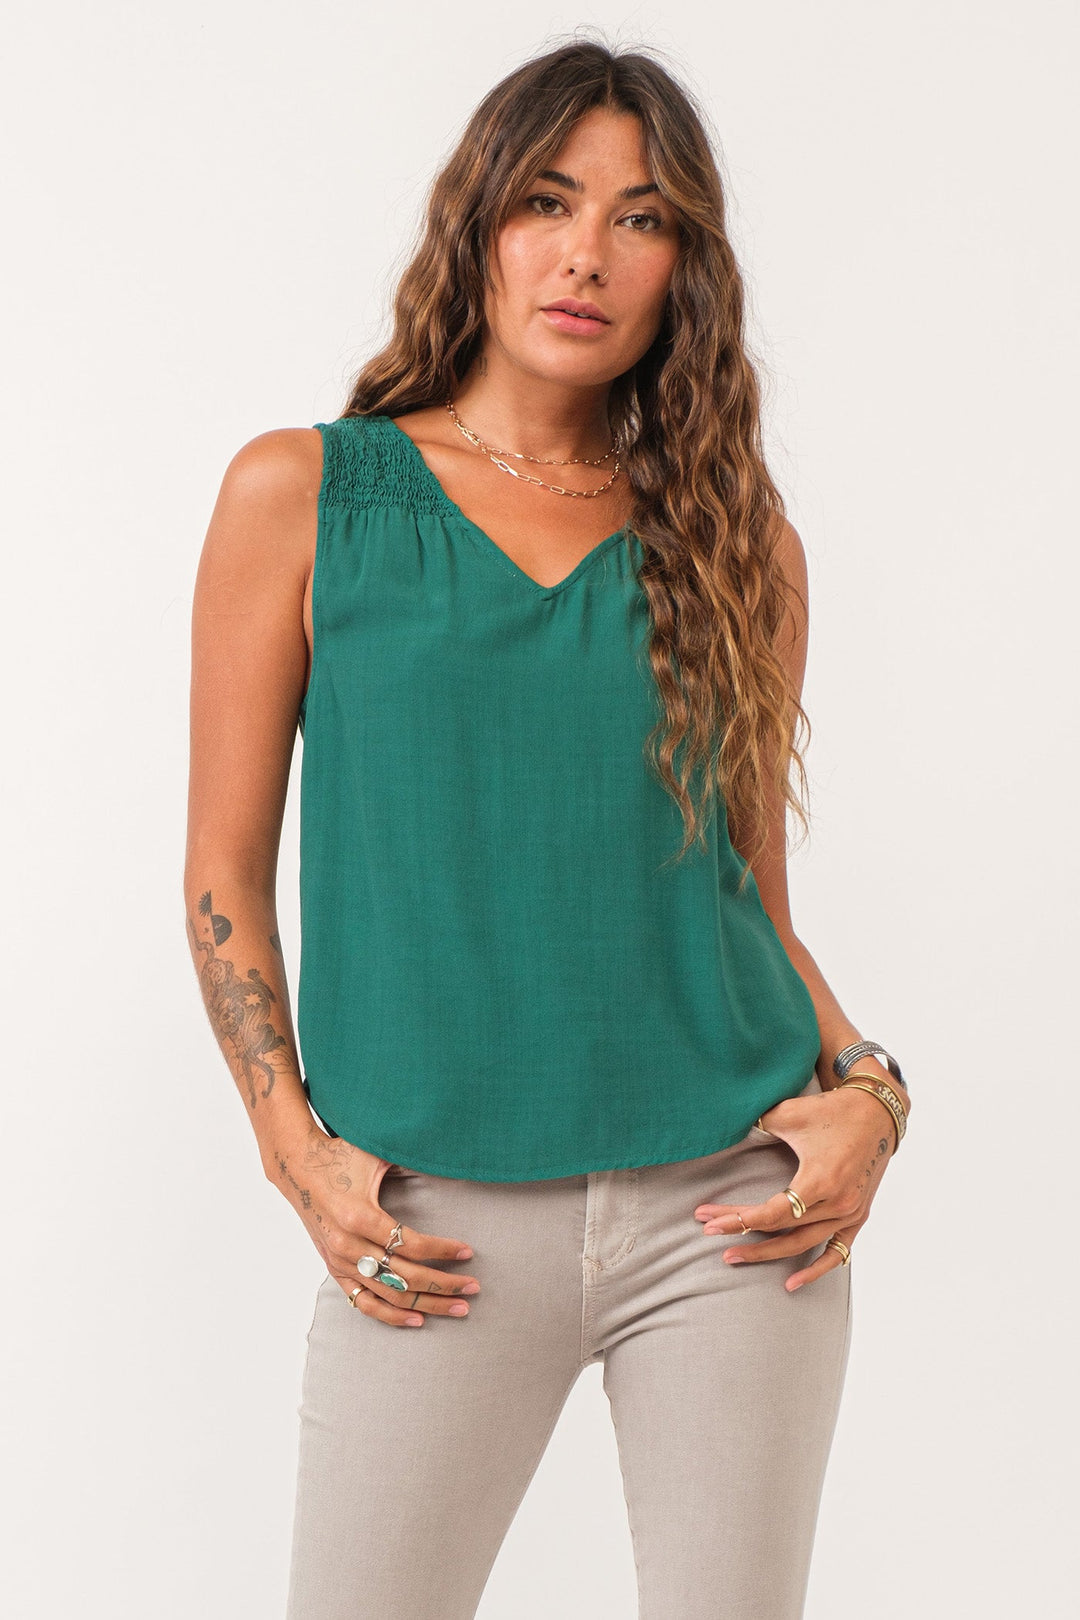 image of a female model wearing a PAIGE RUCHED DETAIL TANK GALAPAGOS GREEN DEAR JOHN DENIM 